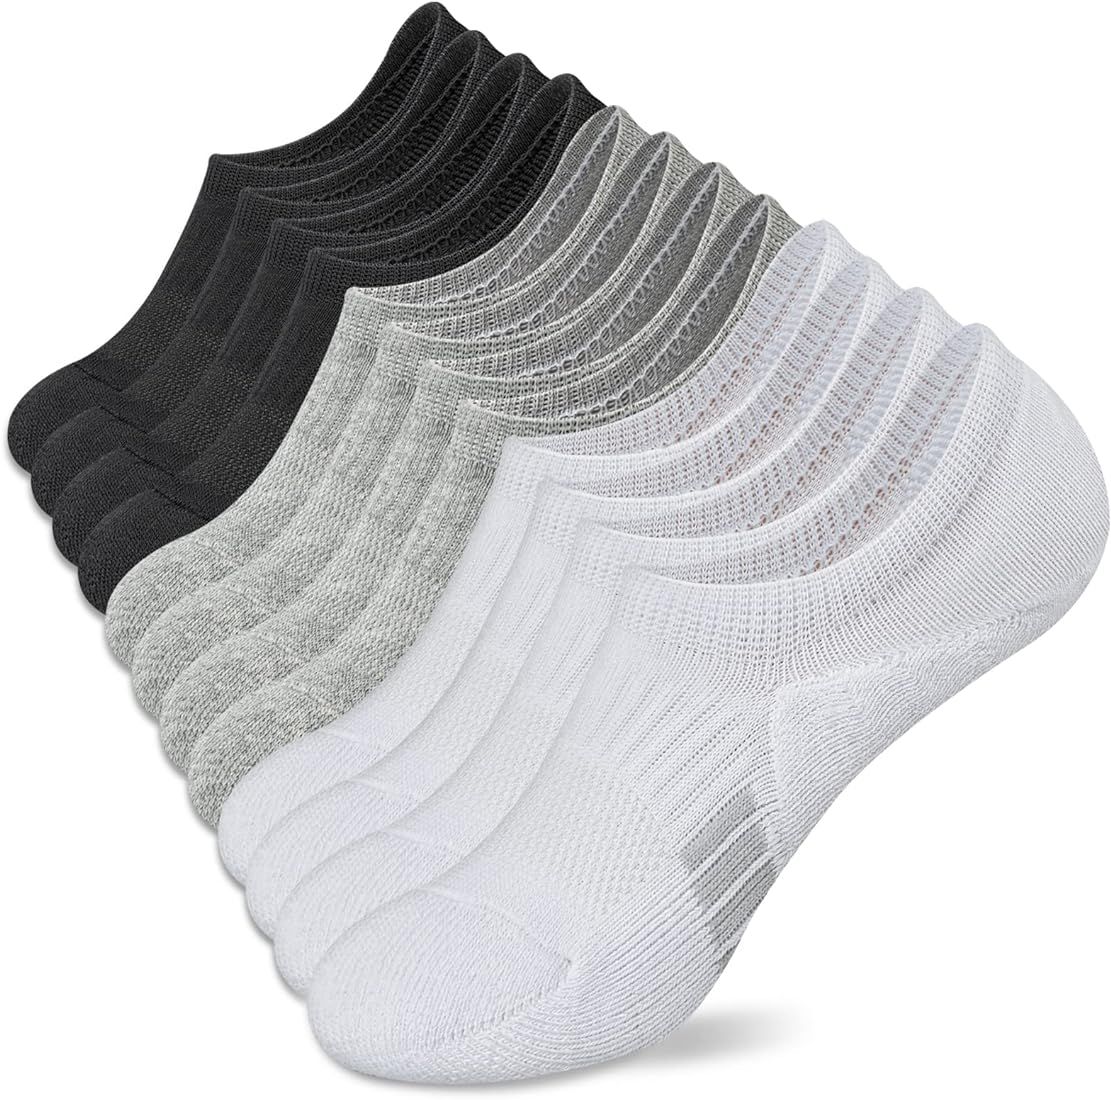 Amutost No Show Socks Womens Athletic cushion Ankle Footies Low Cut Socks 5-6 Pairs | Amazon (US)